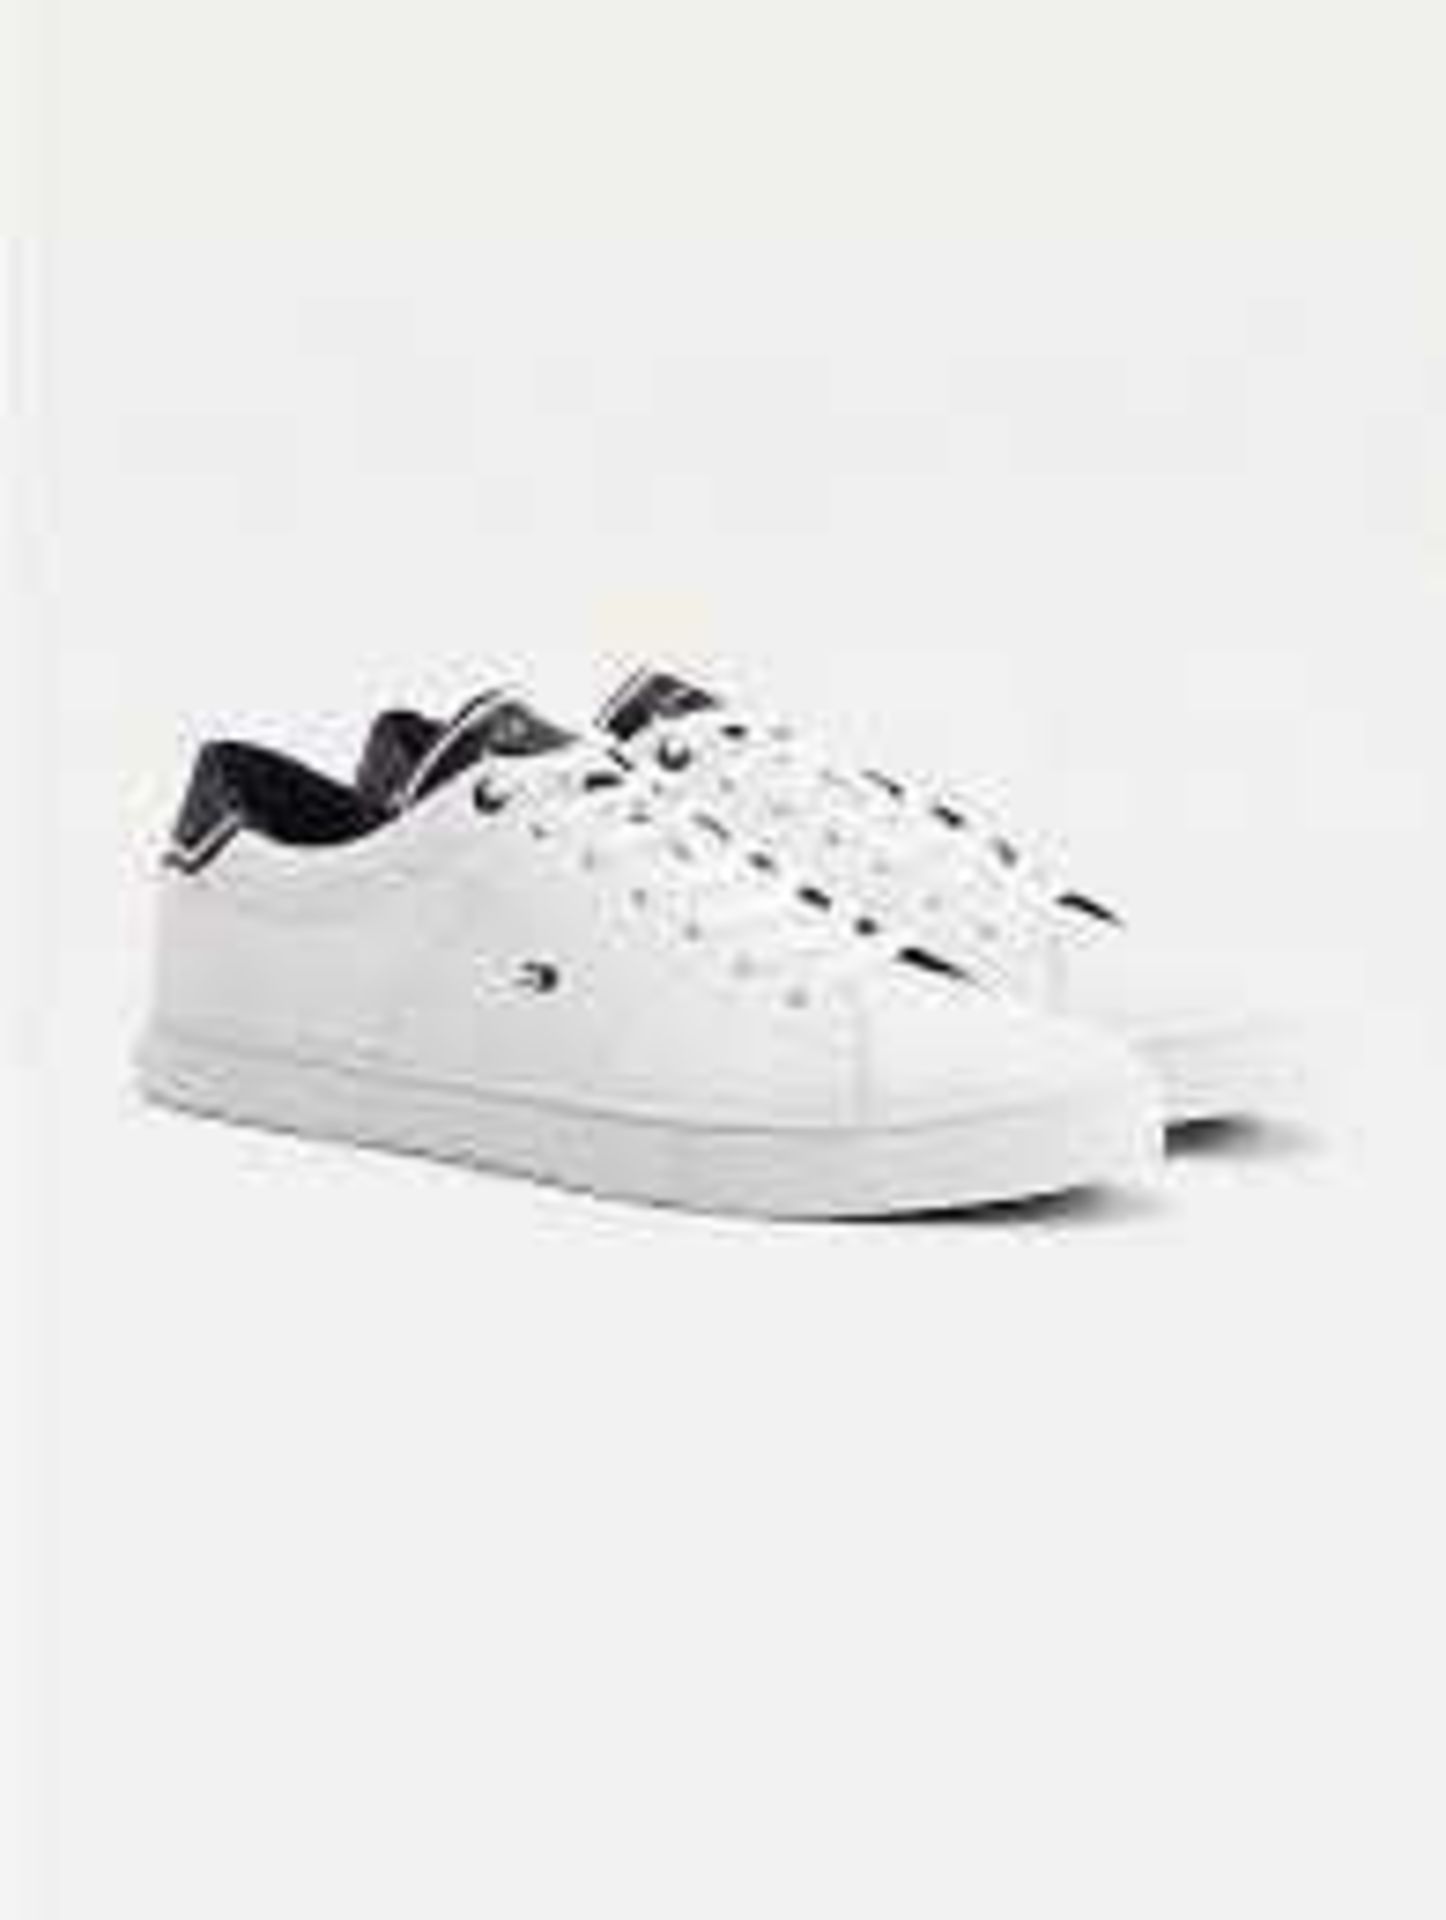 RRP £60 Boxed Pair Of Size Eu 44 Tommy Hilfiger White Canvas Shoes (210611) (Appraisals Are